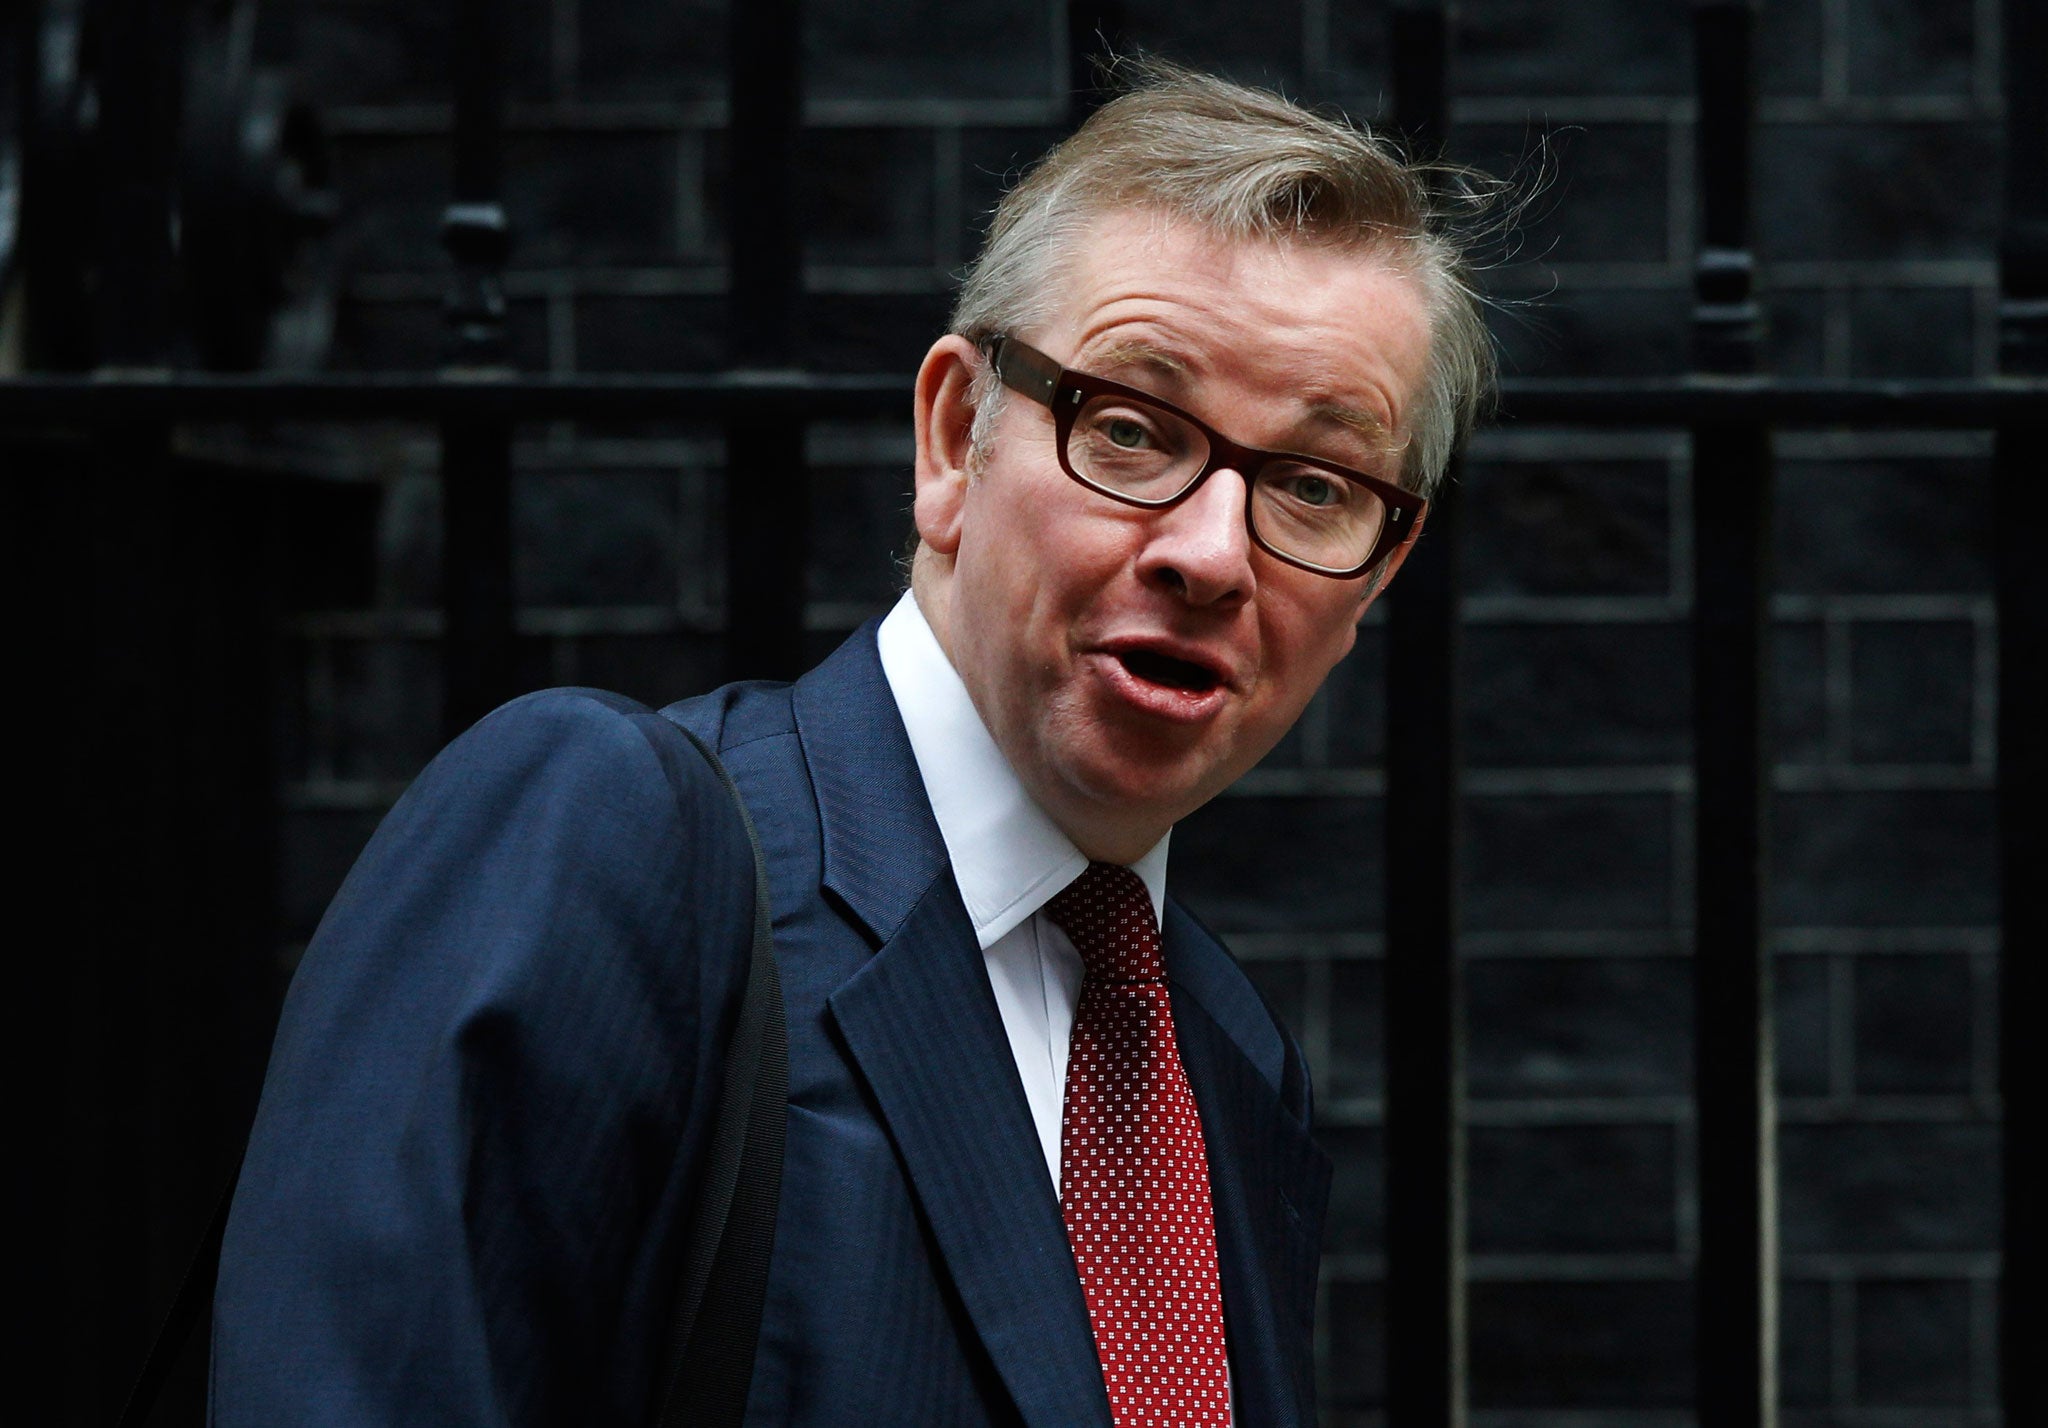 Cabinet Office minister Michael Gove is in Brussels for talks